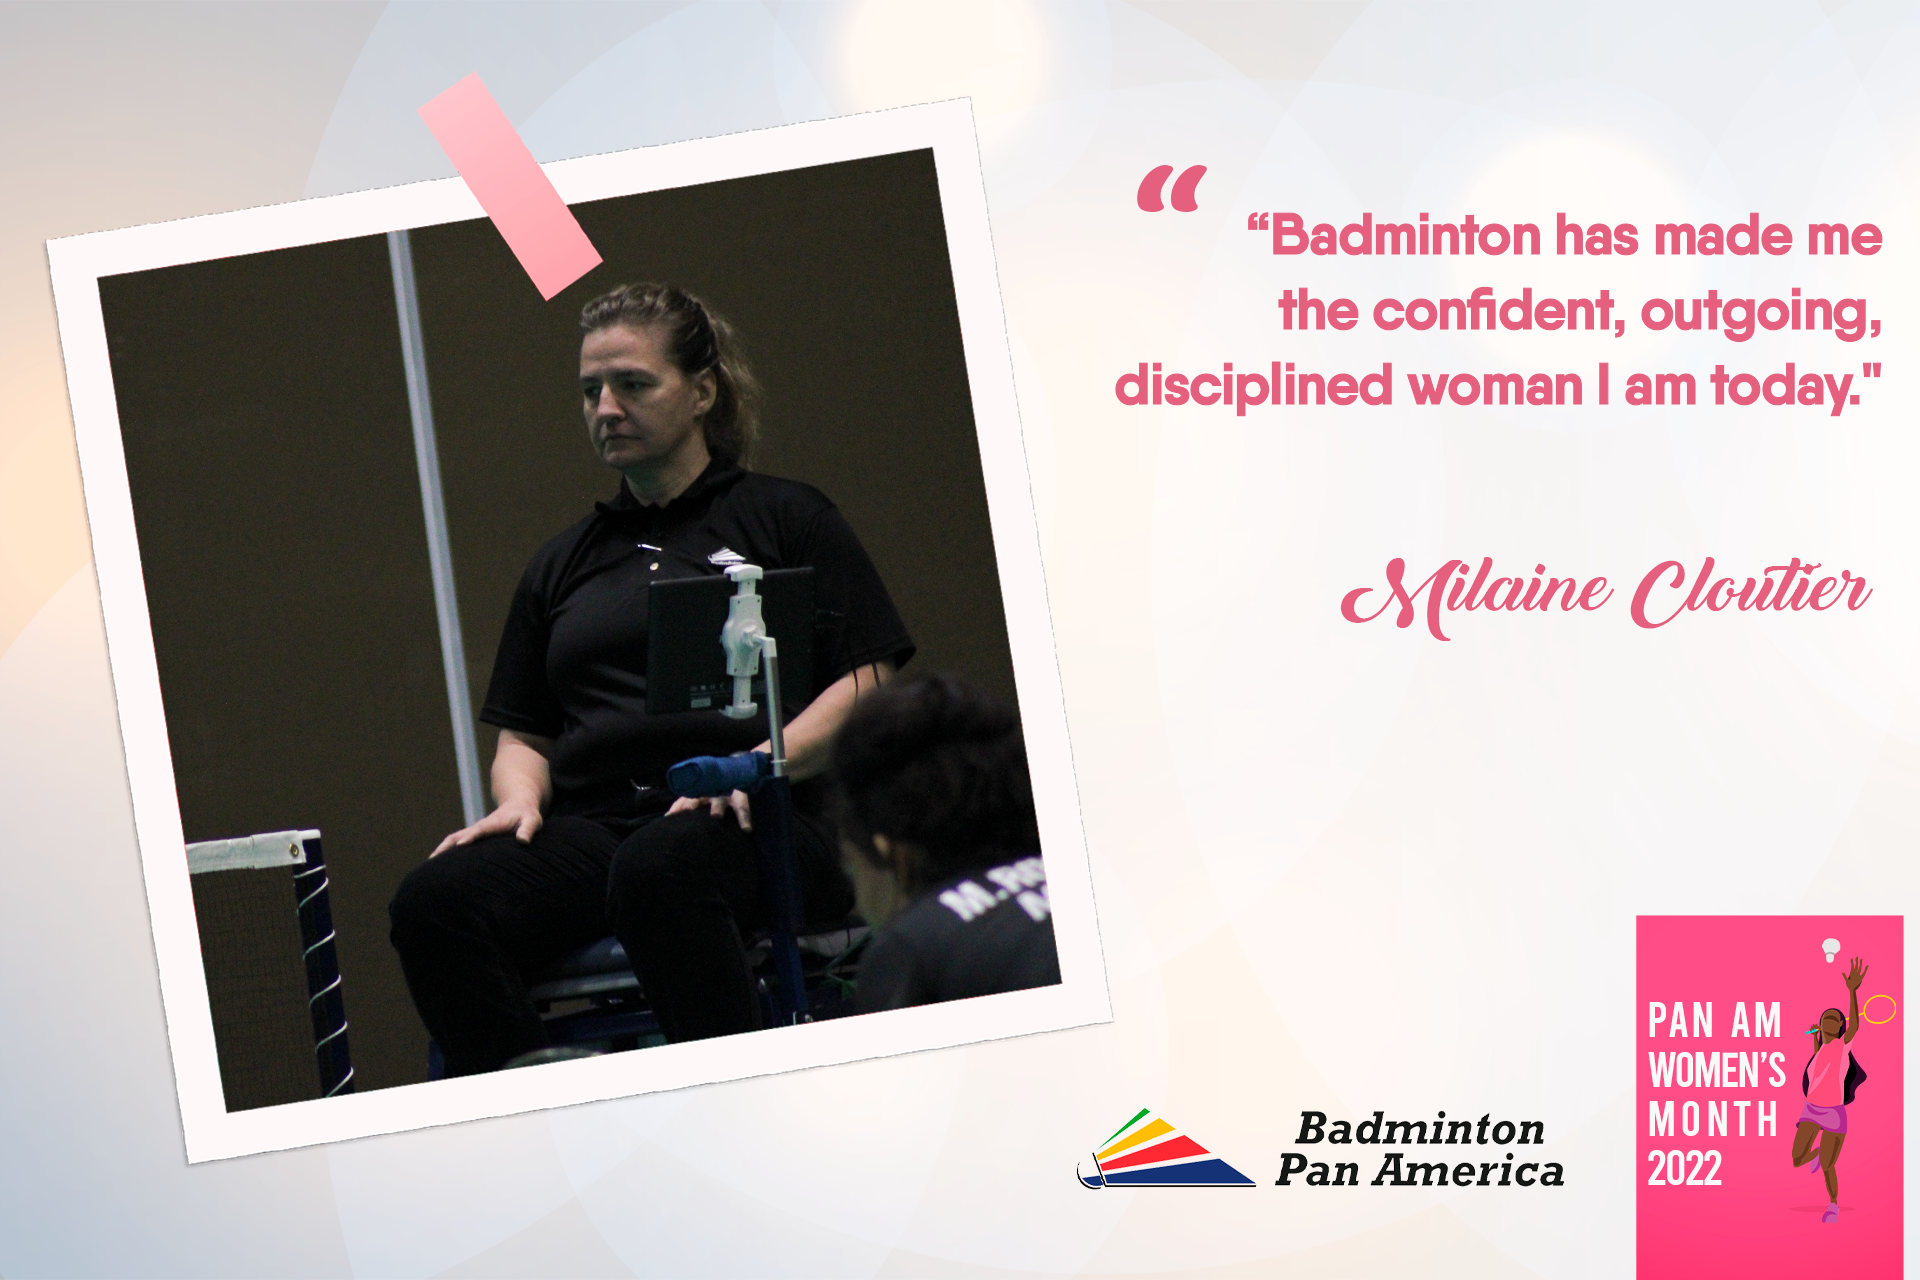 Badminton has made me the confident, outgoing, disciplined woman I am today.” – Milaine Cloutier